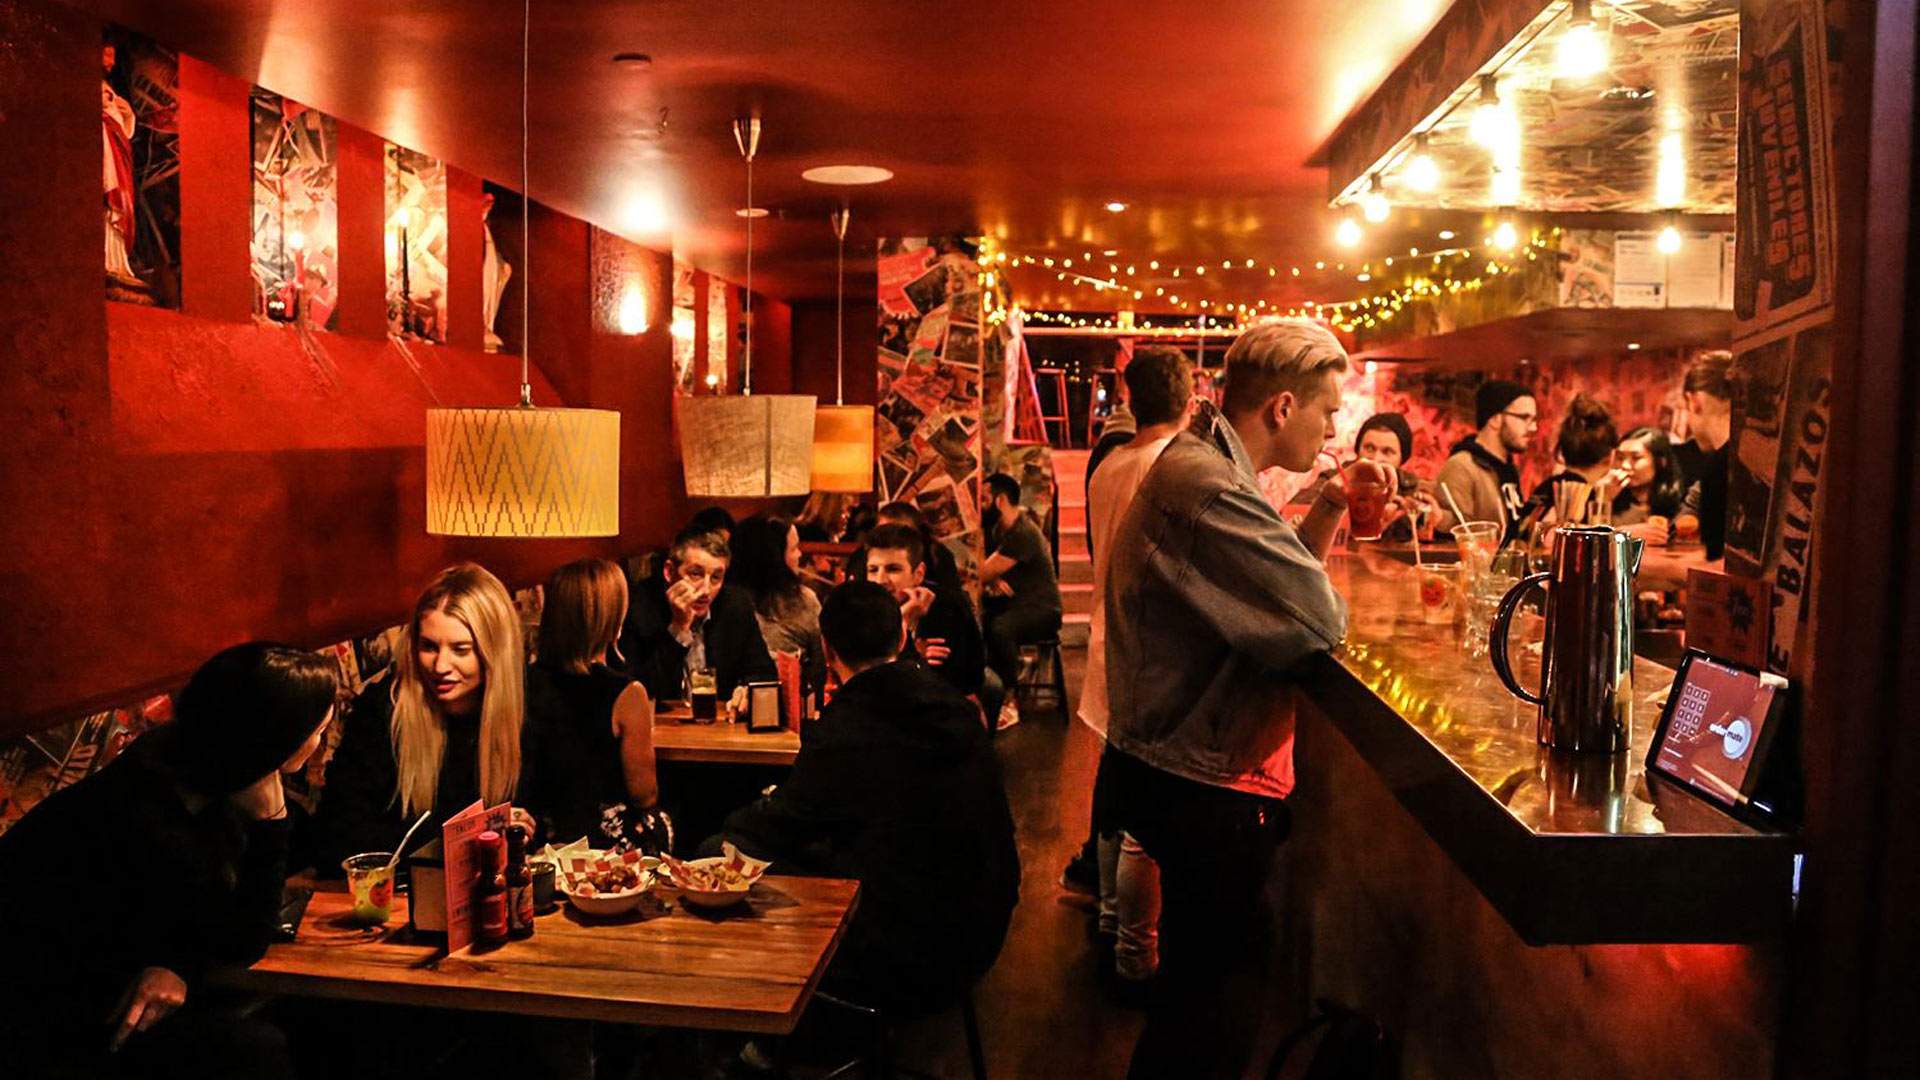 The Best Bars with Snacks to Track Down When You're Just a Little Bit Hungry